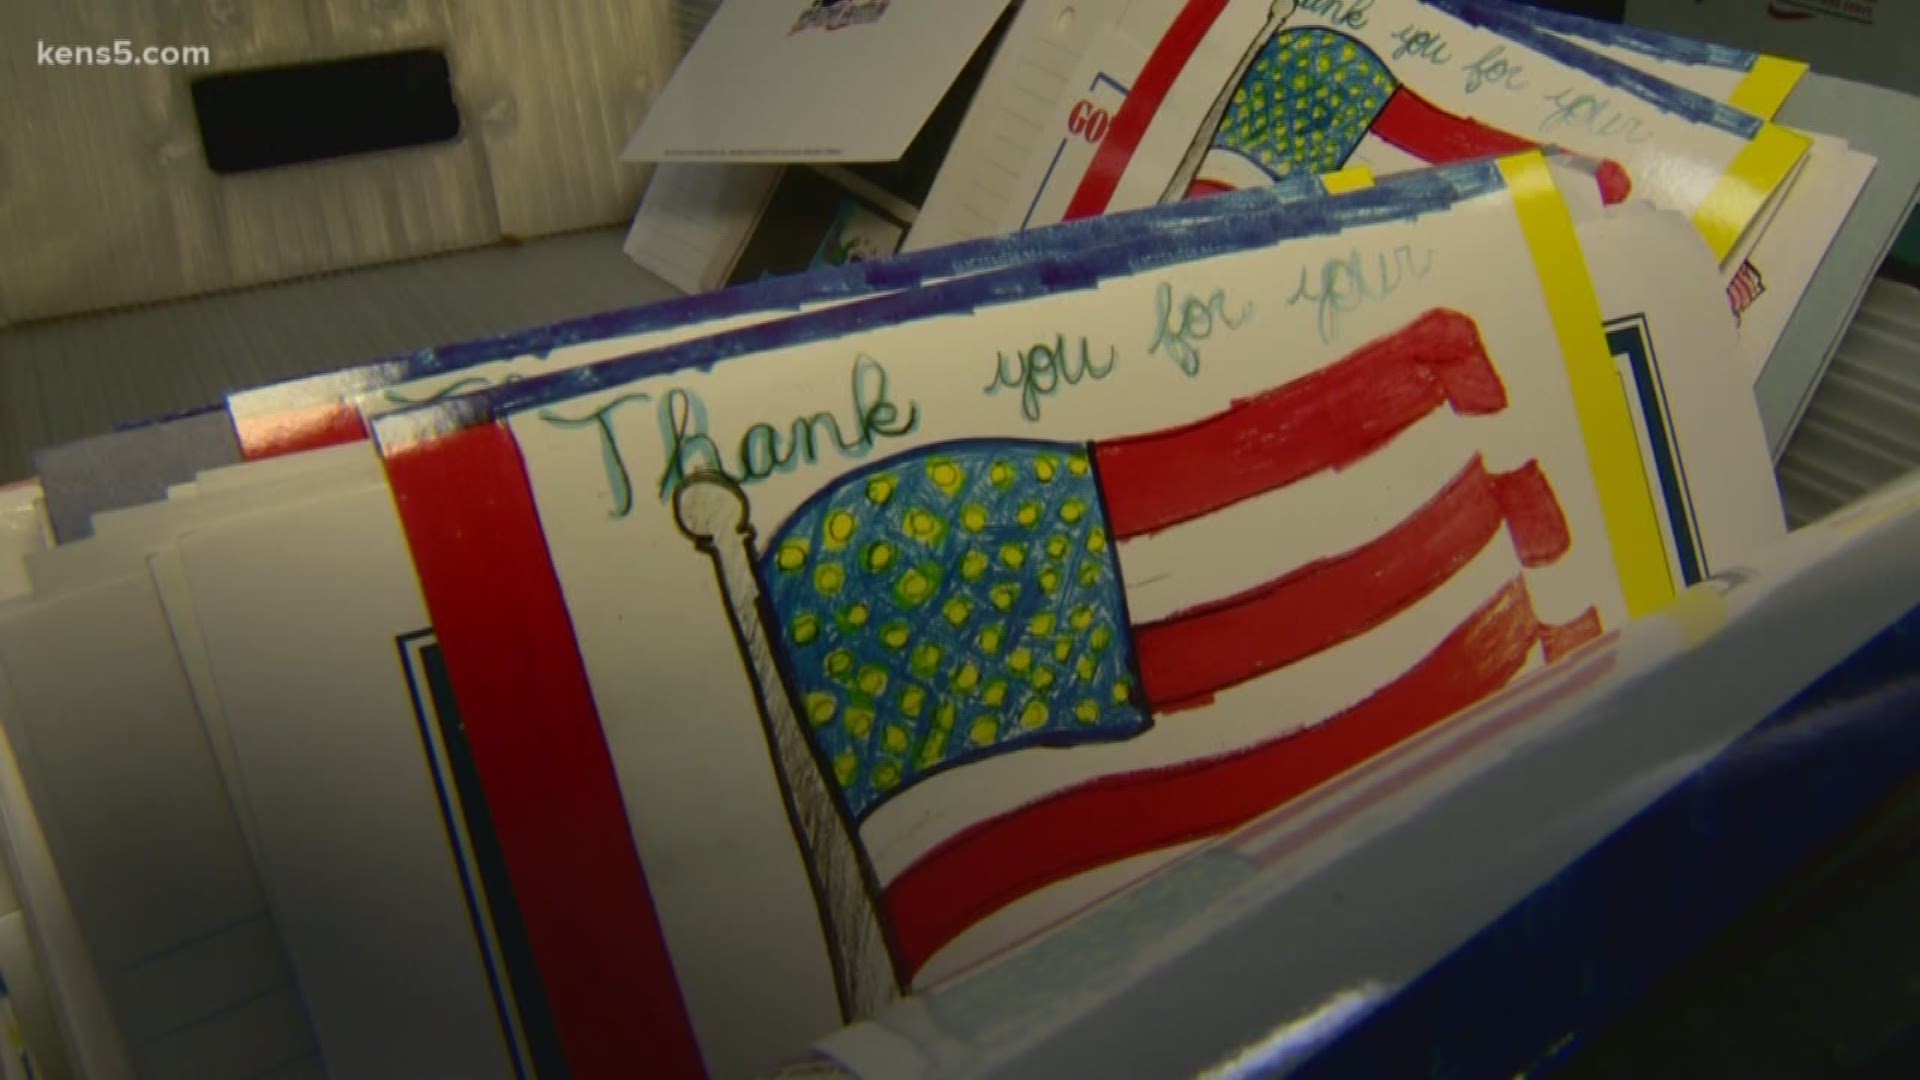 Servicemembers will get special packages this holiday season thanks to Operation Gratitude and USAA.